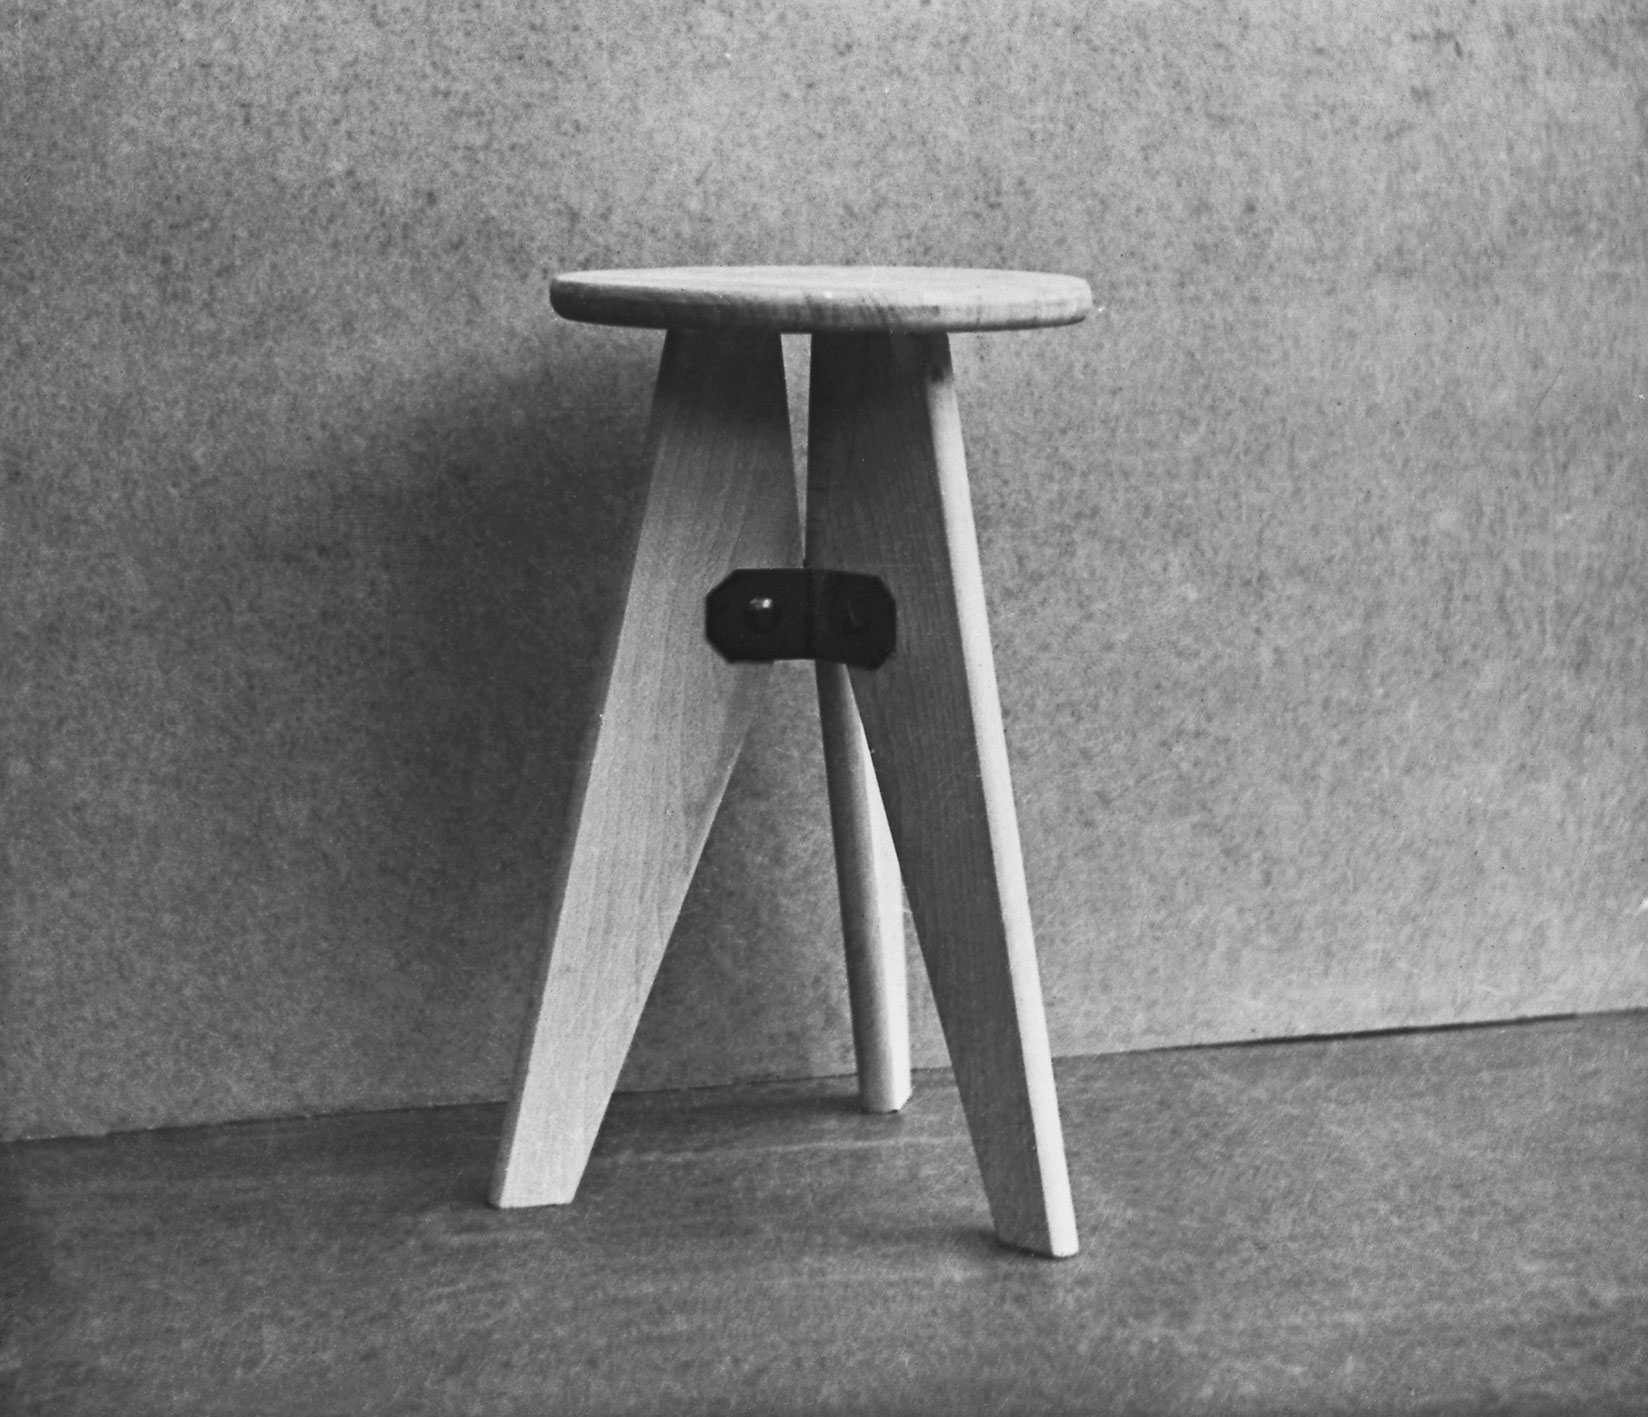 Solid wood, 3-legged stool, 1941. View in the workshop, undated.